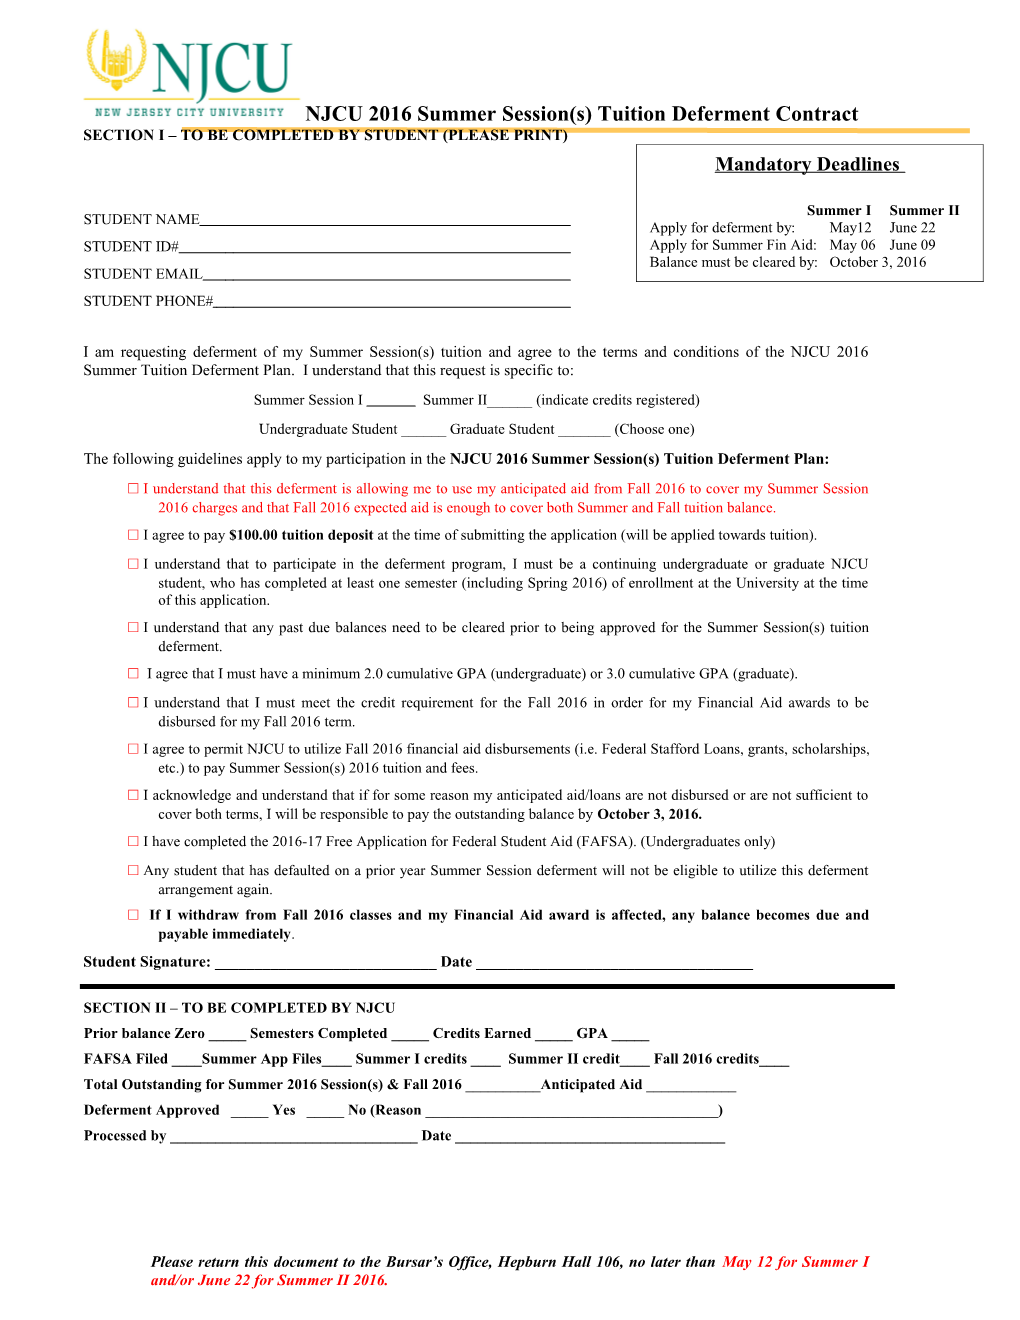 NJCU 2016Summer Session(S) Tuition Deferment Contract